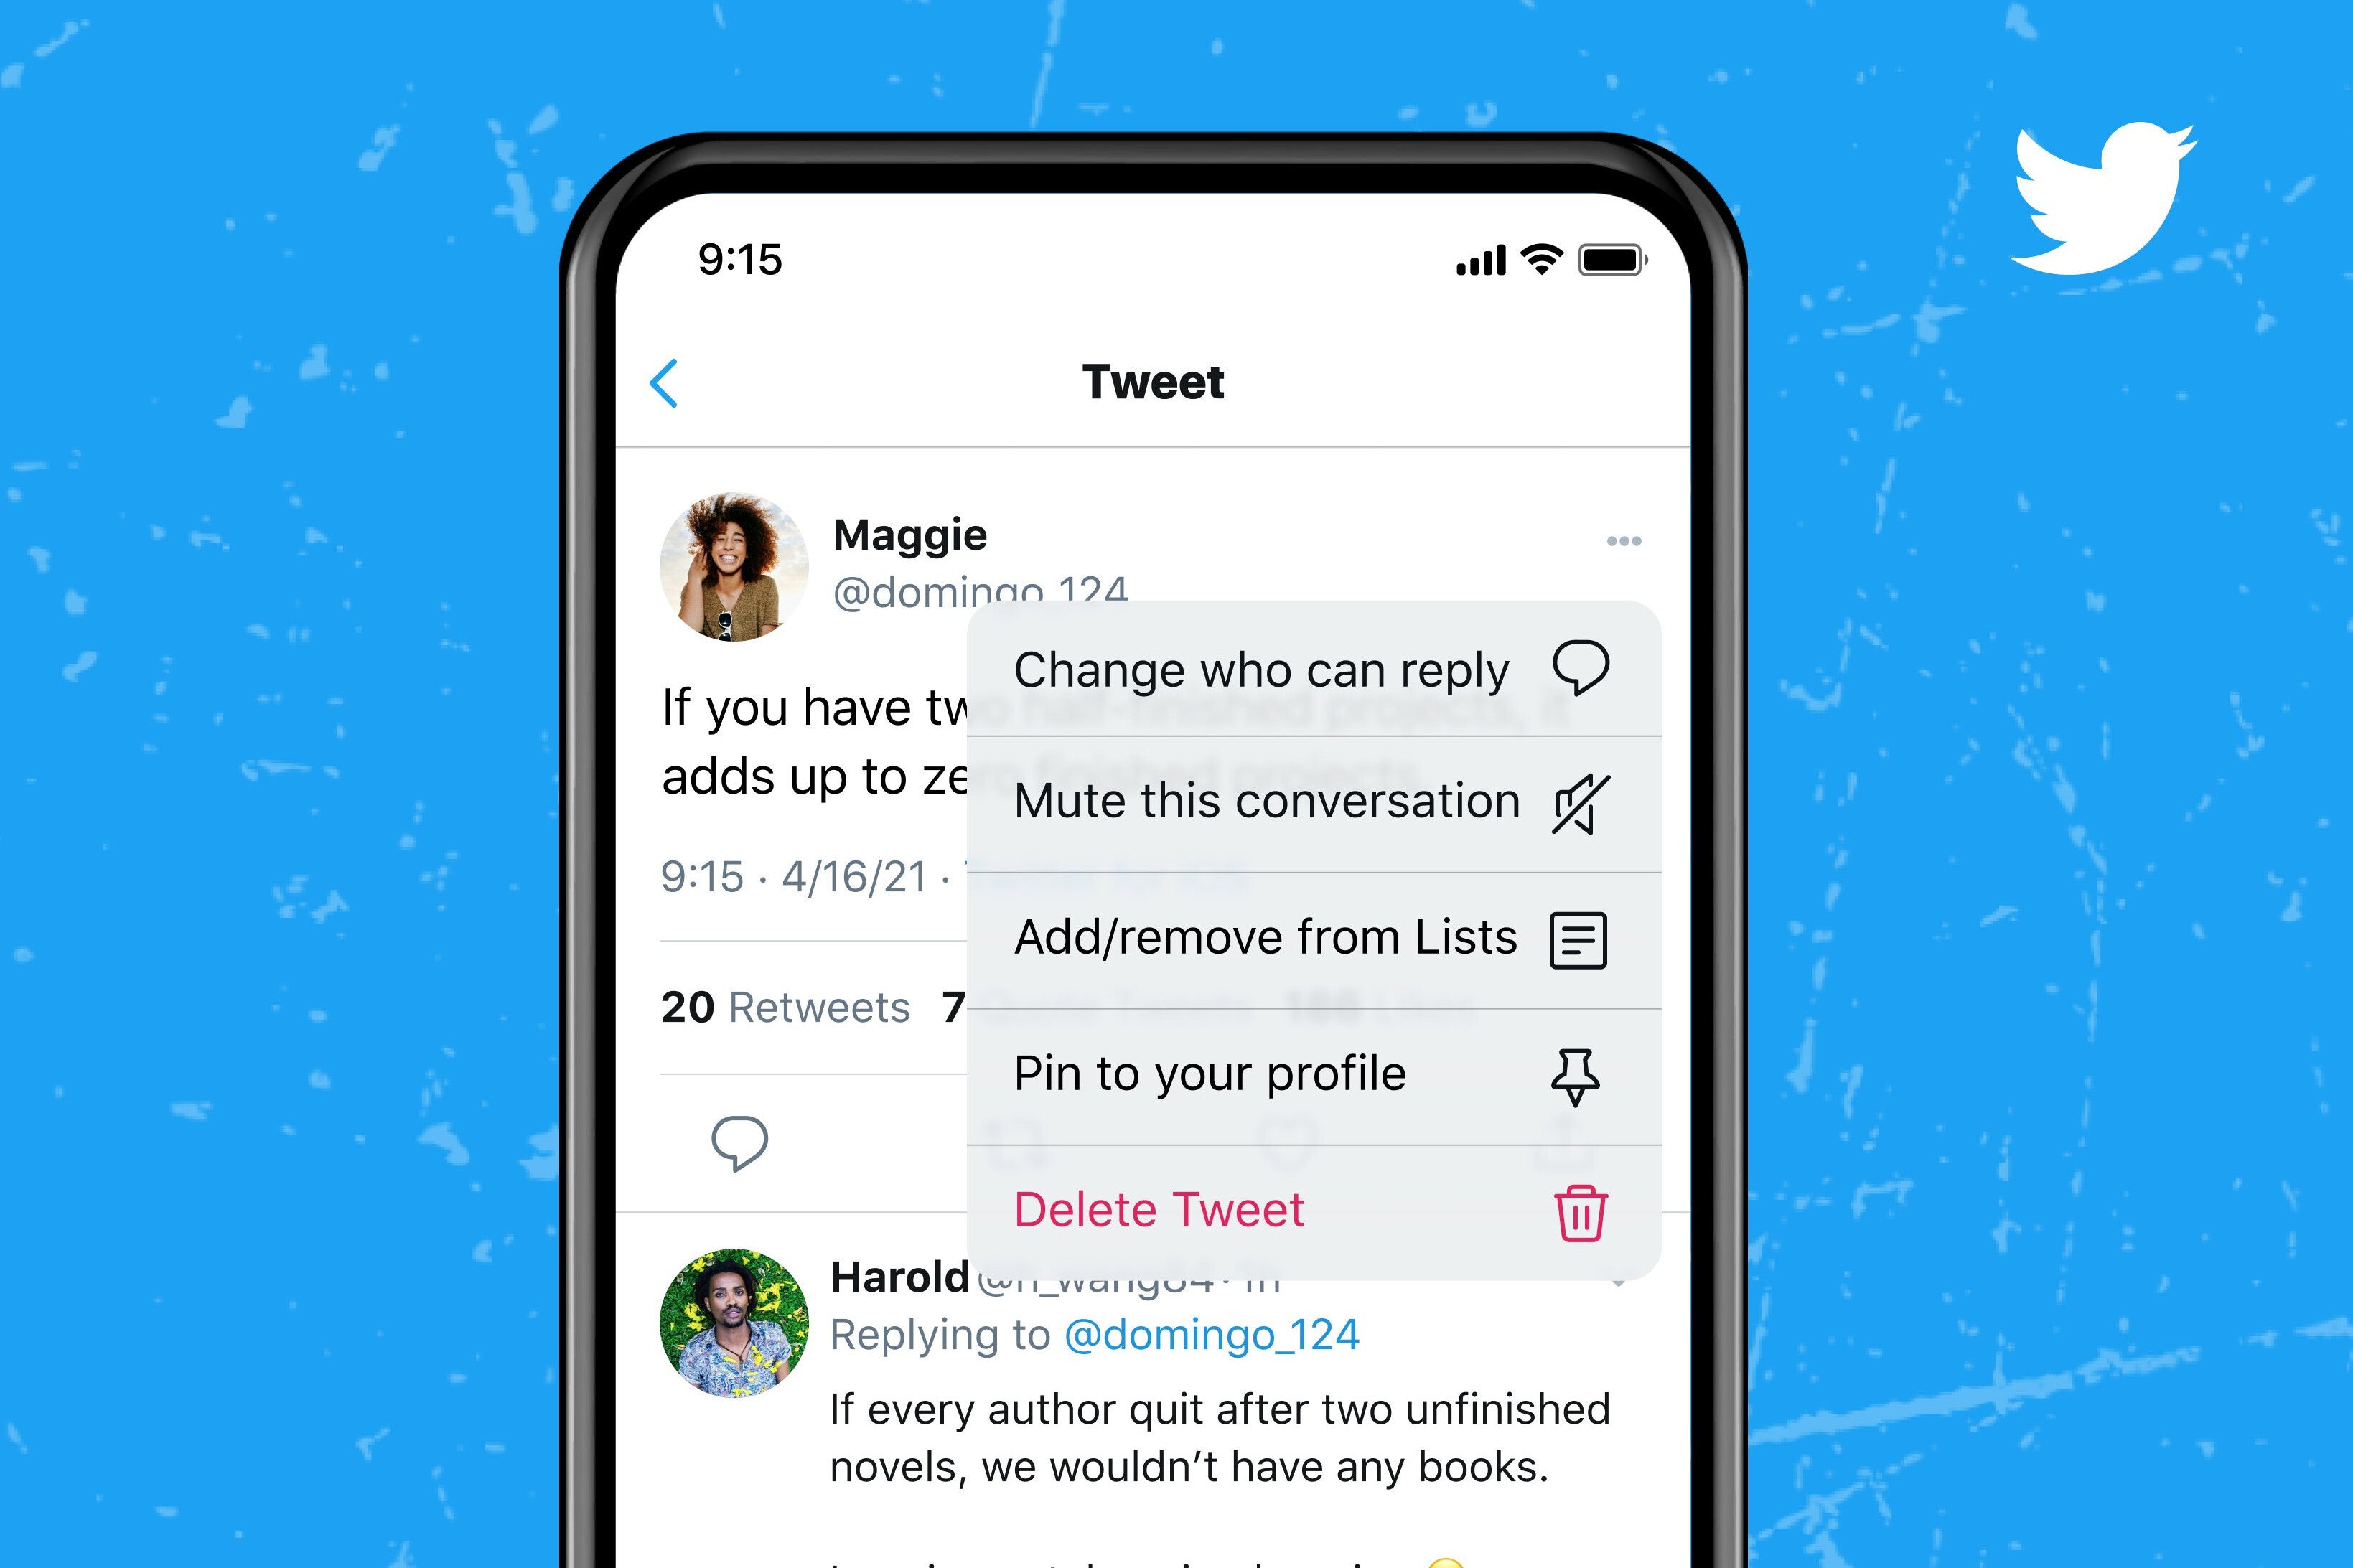 Three reply filters are available - You can now limit replies to your Tweet even after it has been published on Twitter